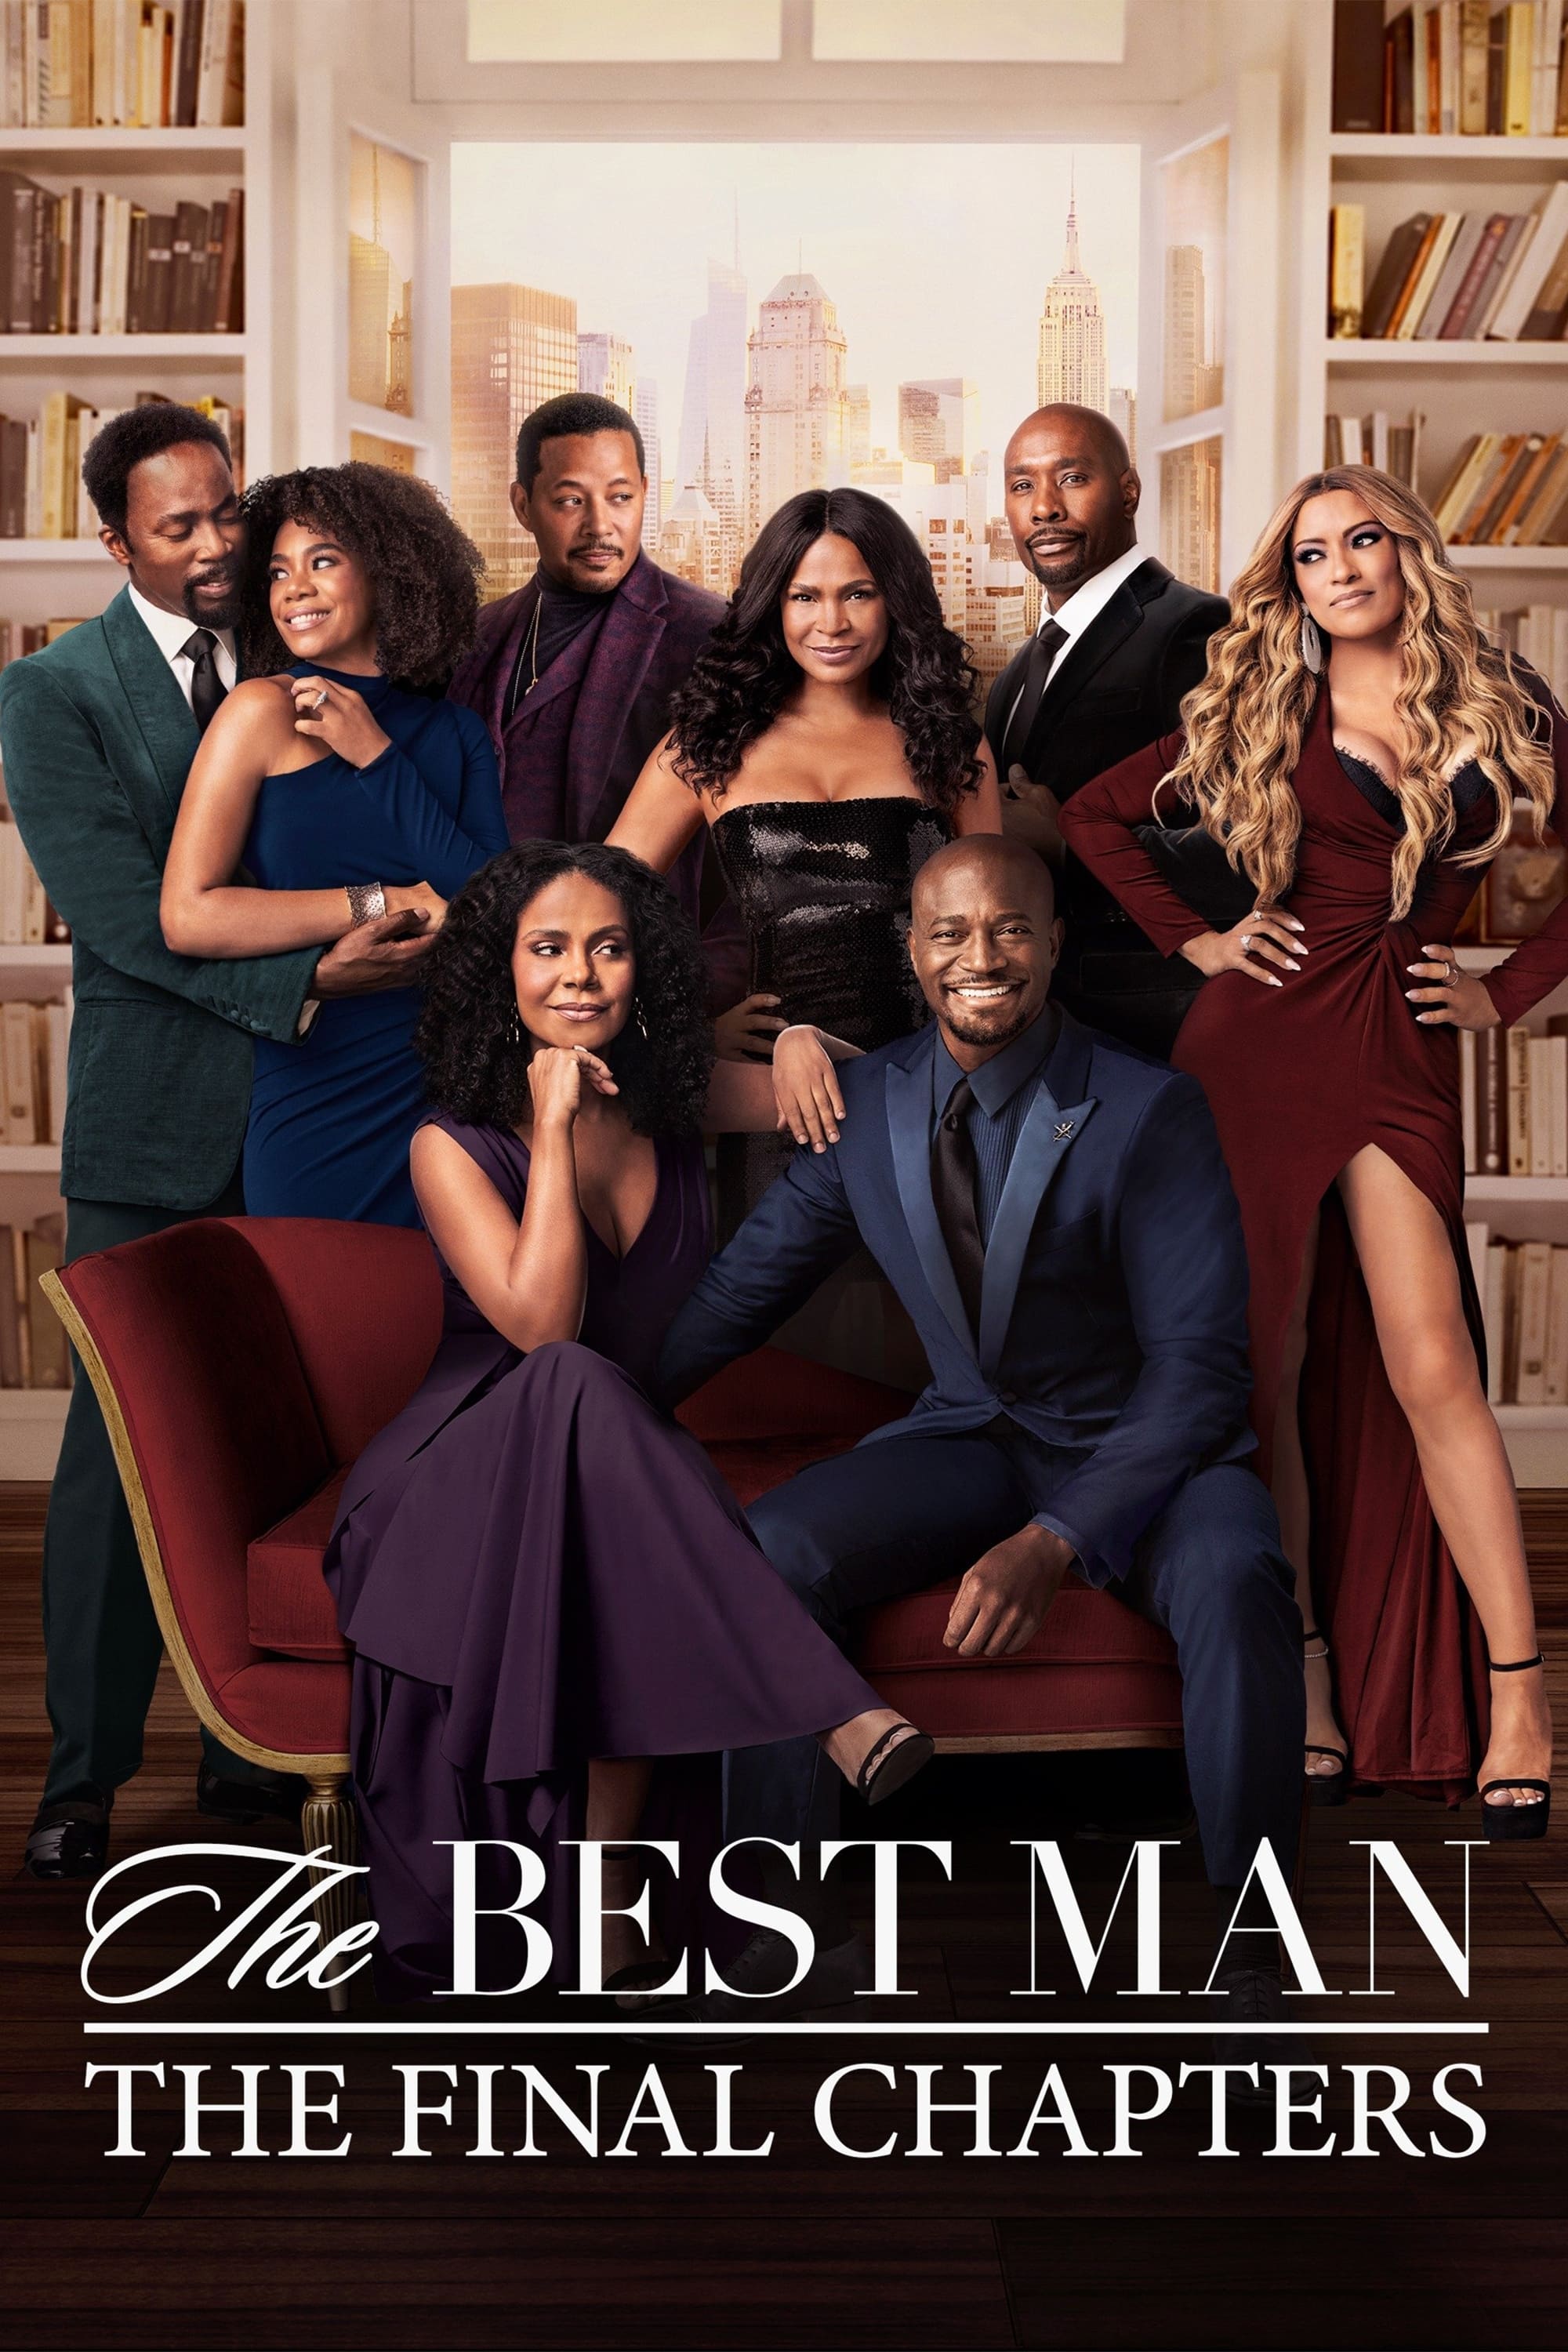 The Best Man: The Final Chapters TV Shows About Based On Movie